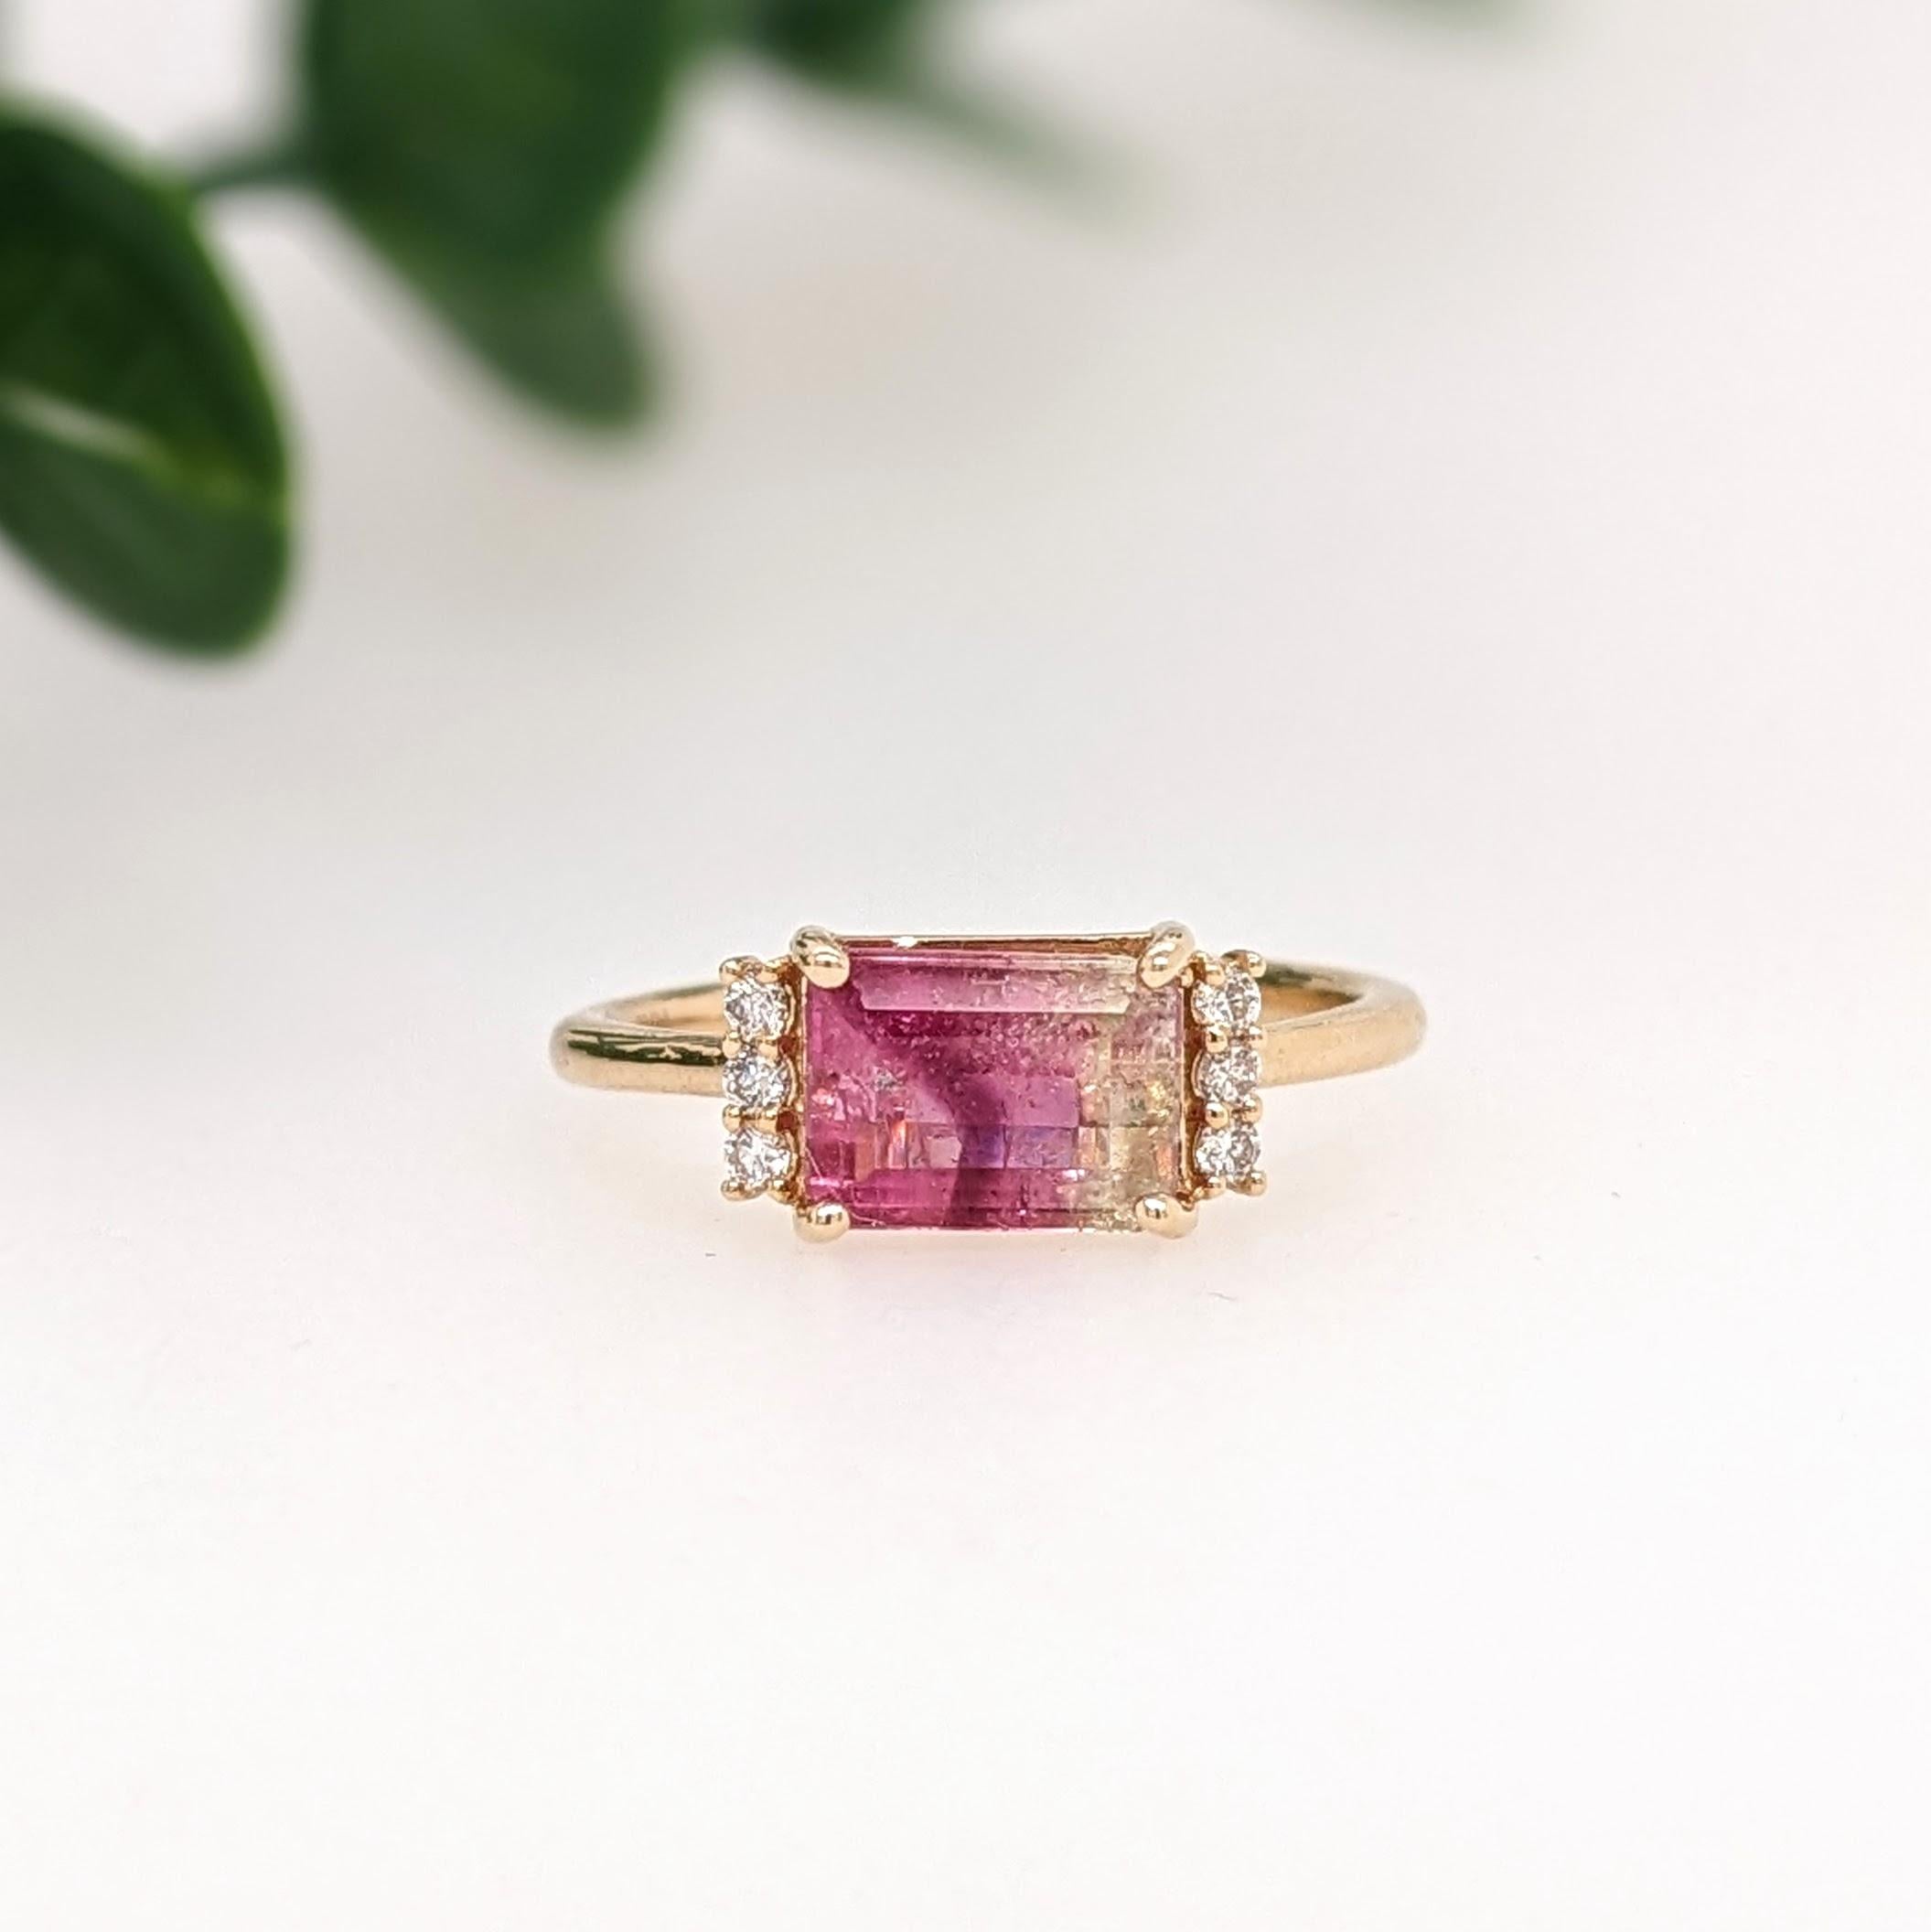 This ring features a beautiful pink and white bi-color tourmaline in a classic NNJ Designs ring setting with sparkling natural diamonds all set in 14k yellow gold. A gorgeous modern look that's perfectly balanced between minimalist and